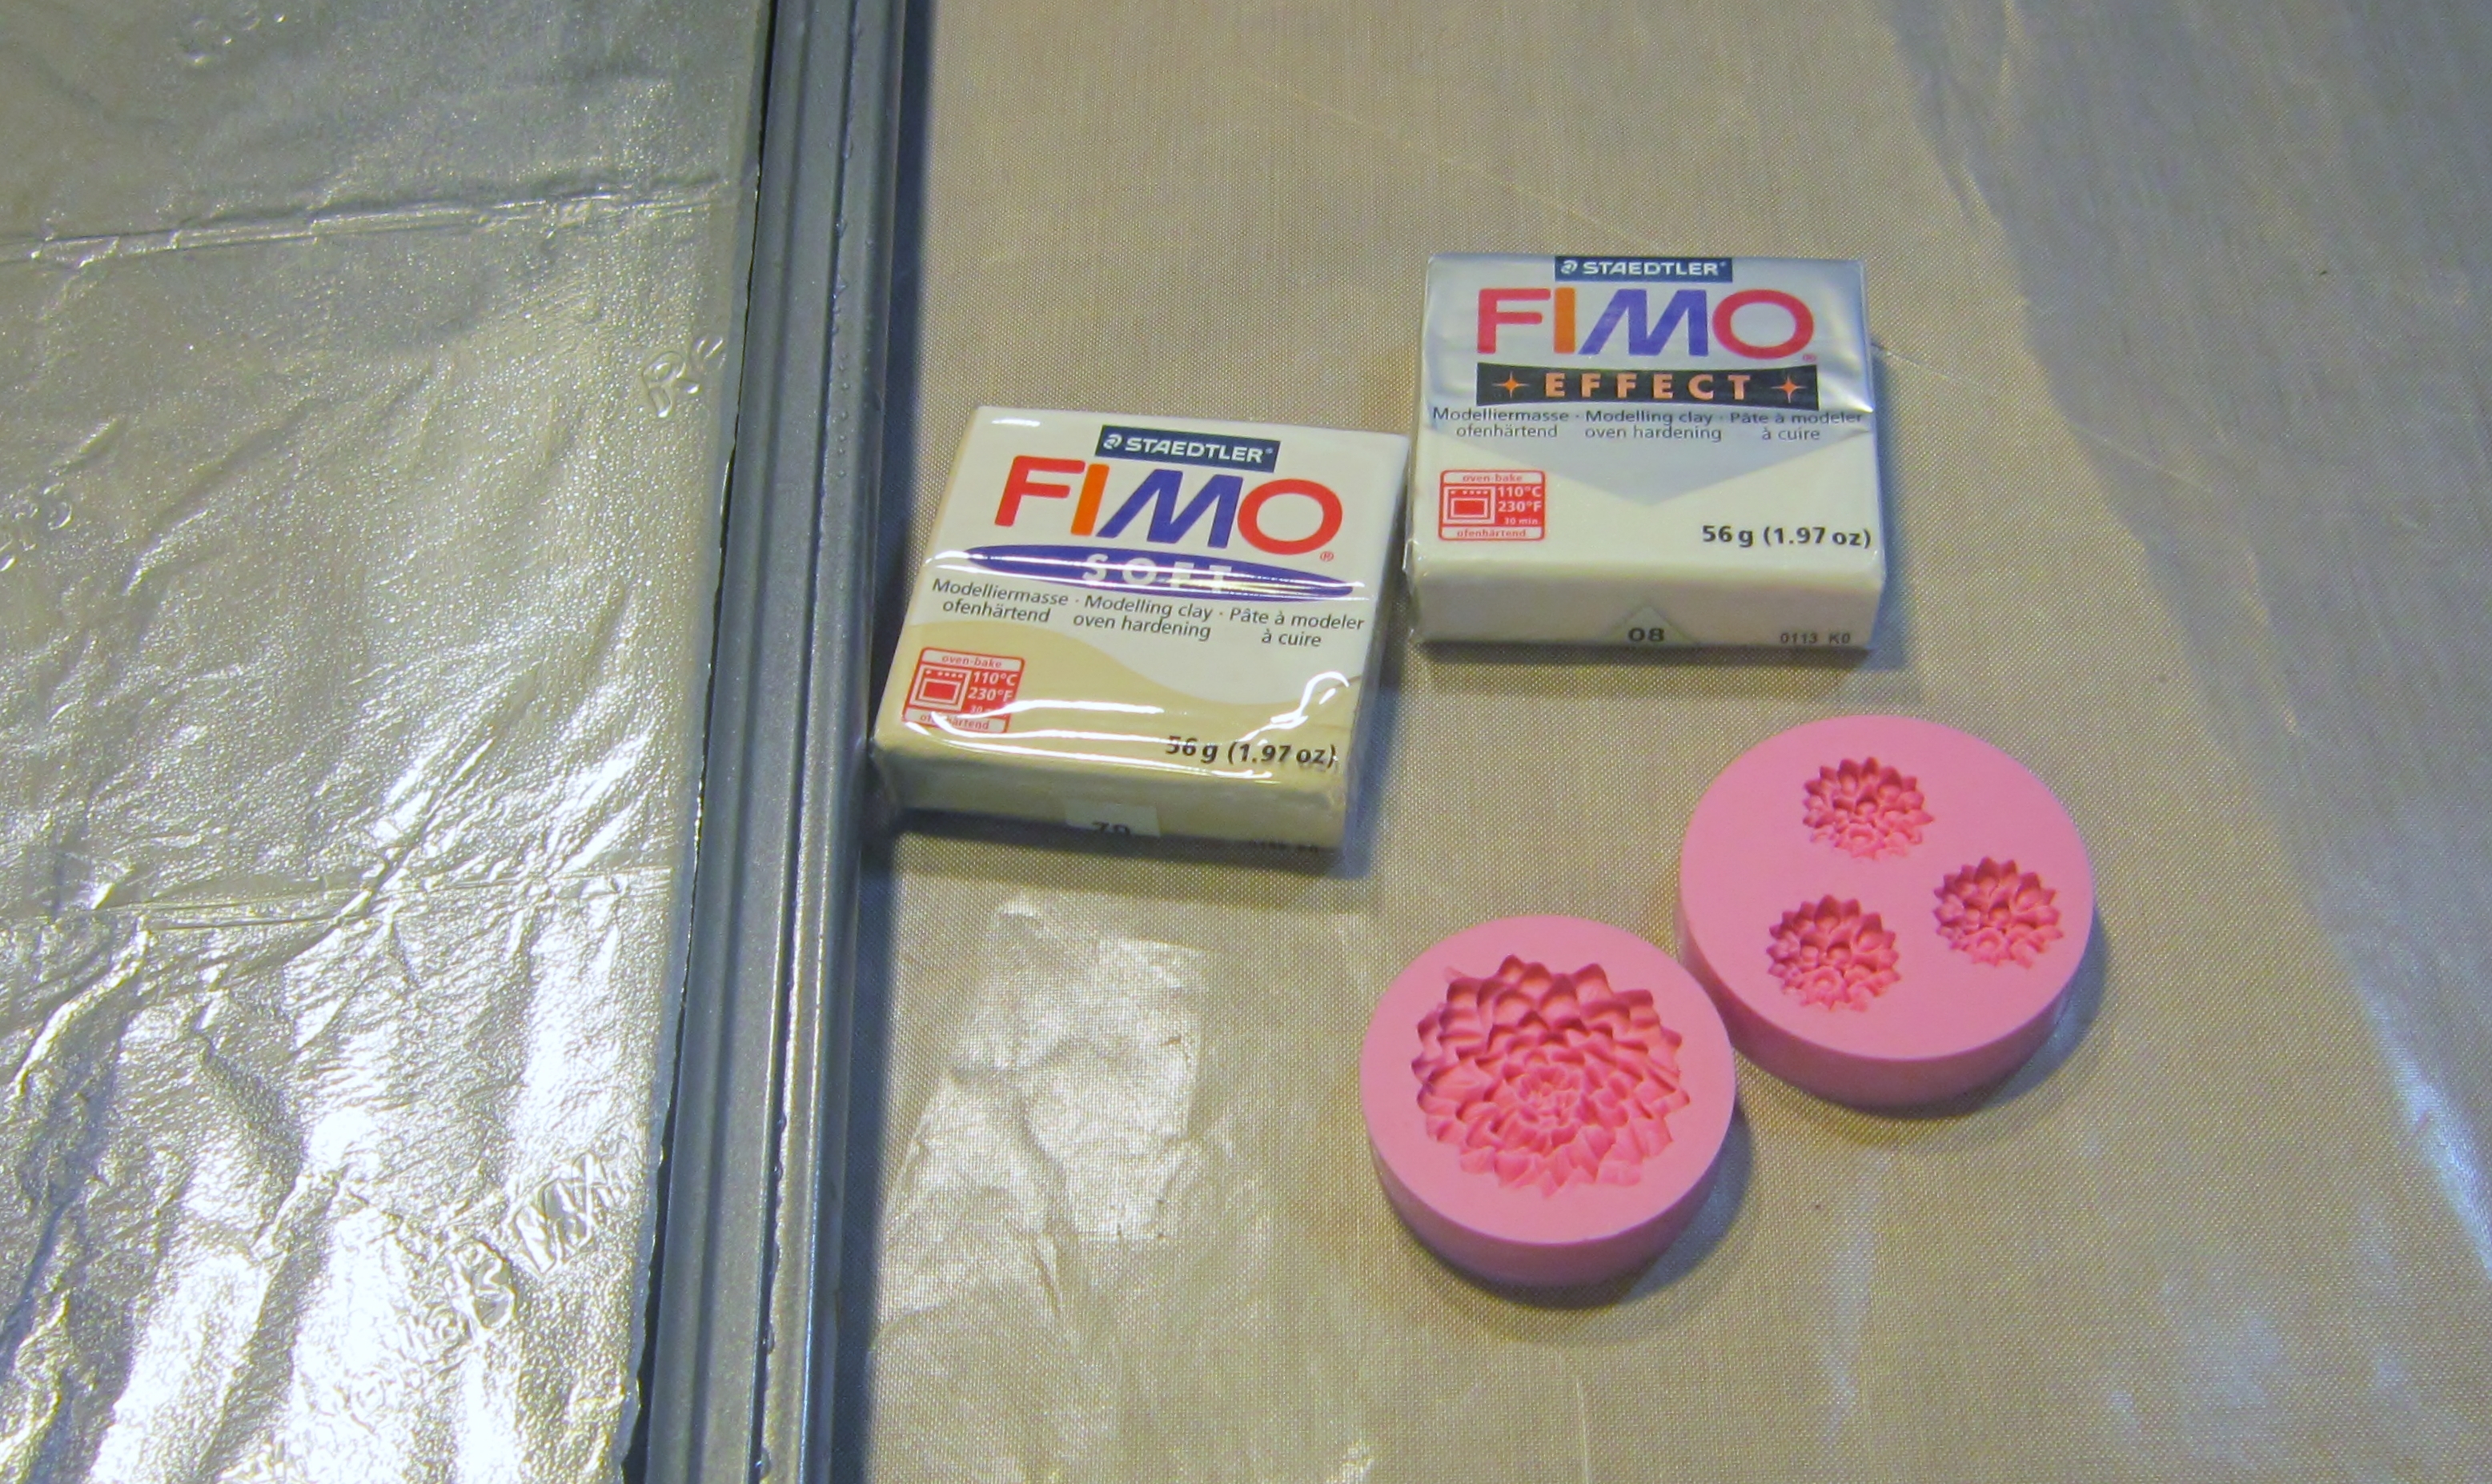 Tutorial: How to make clay flower embellishments using Mold Muse molds 